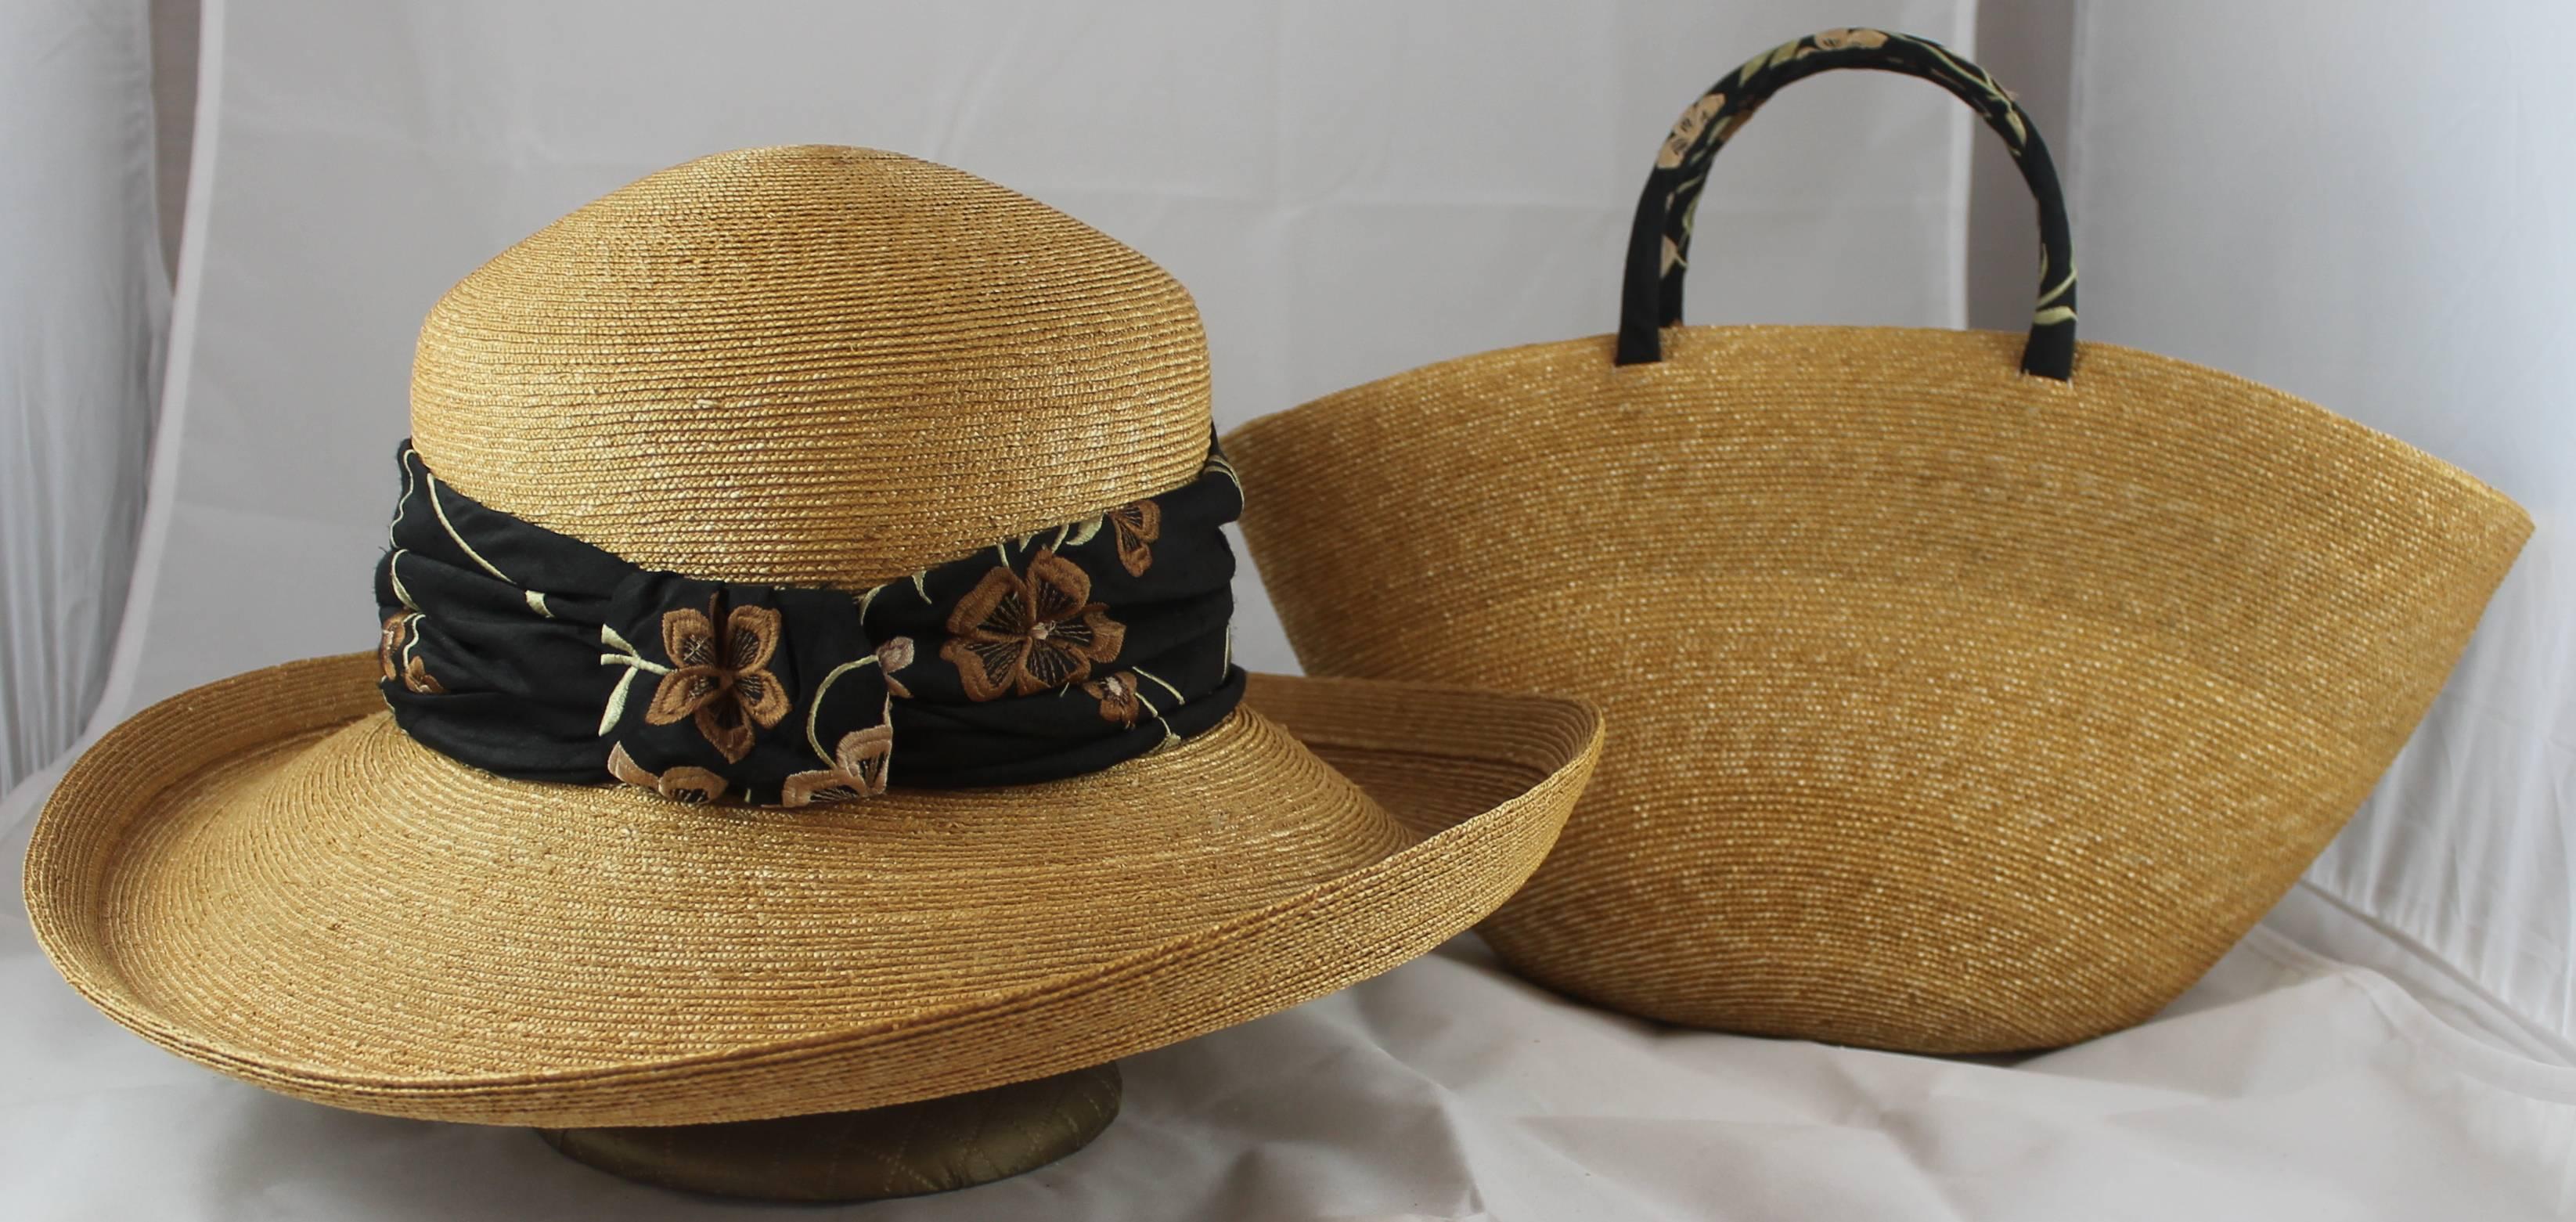 Suzanne Couture Millinery Small Tan Woven Straw Bag with Floral Handles 3